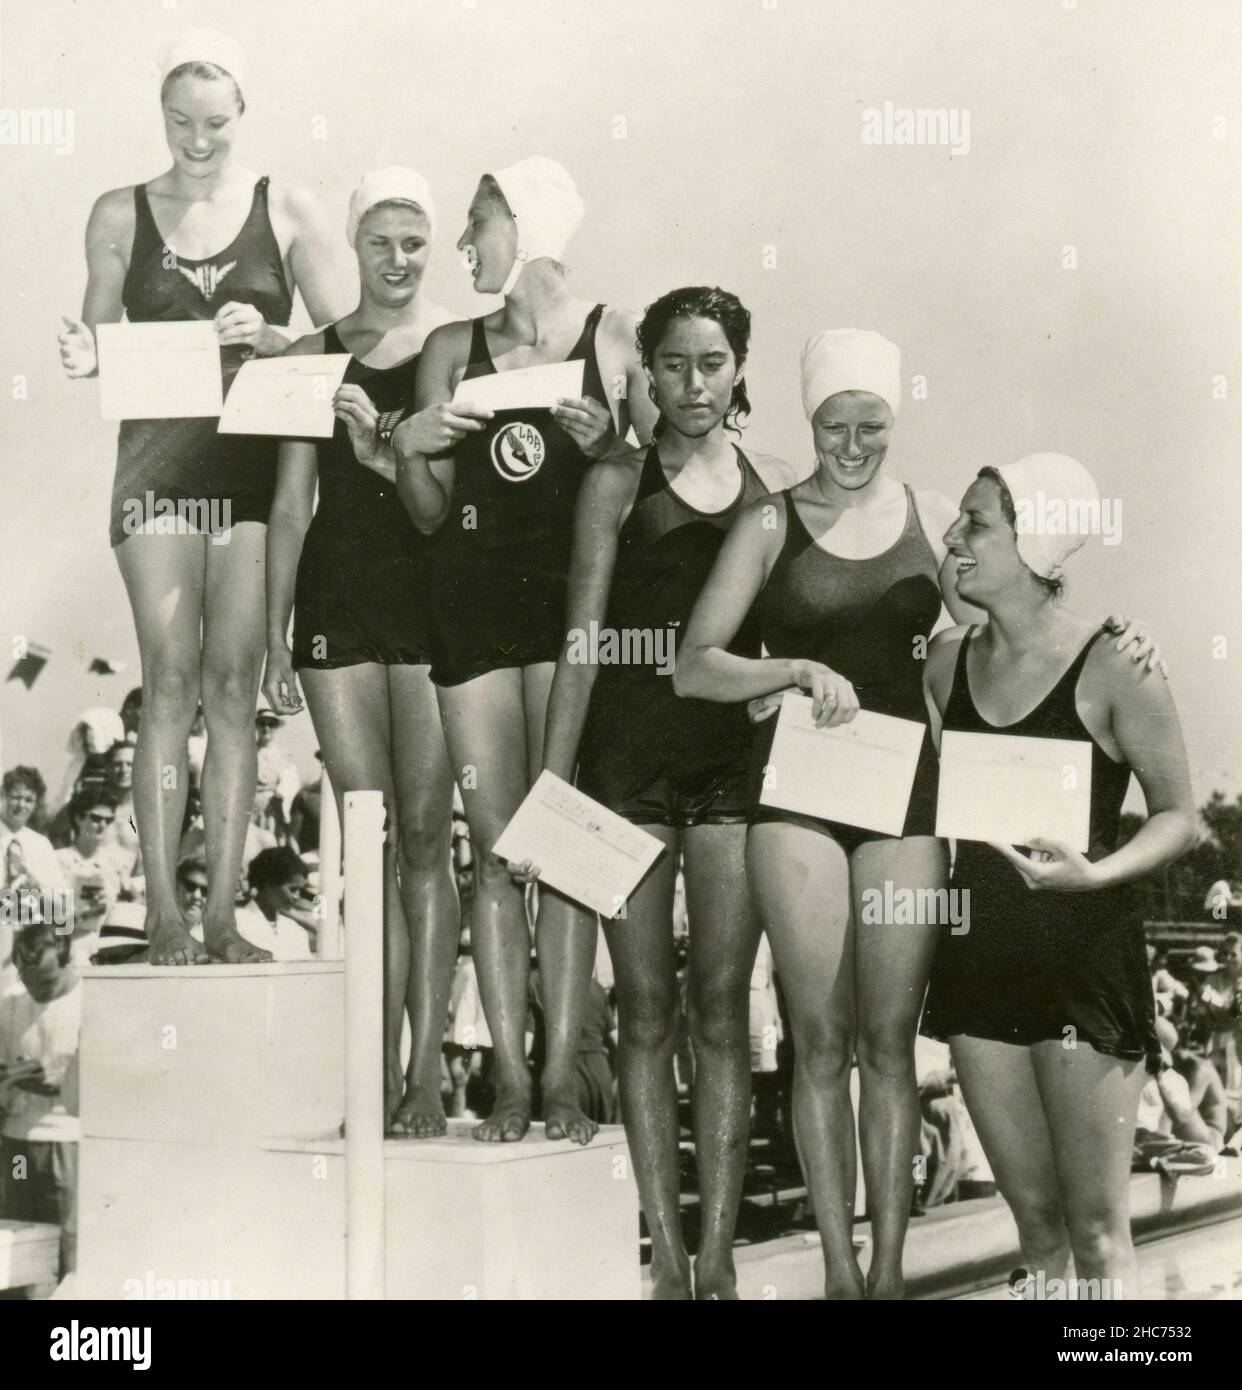 American Olympic women swimming team, from left: Ann Elizabeth Curtis, Marie Louise Corriden, Brenda Helser, Thelma Kalama, Jacqueline Lavine, and Mary Patricia Healy, USA 1948 Stock Photo